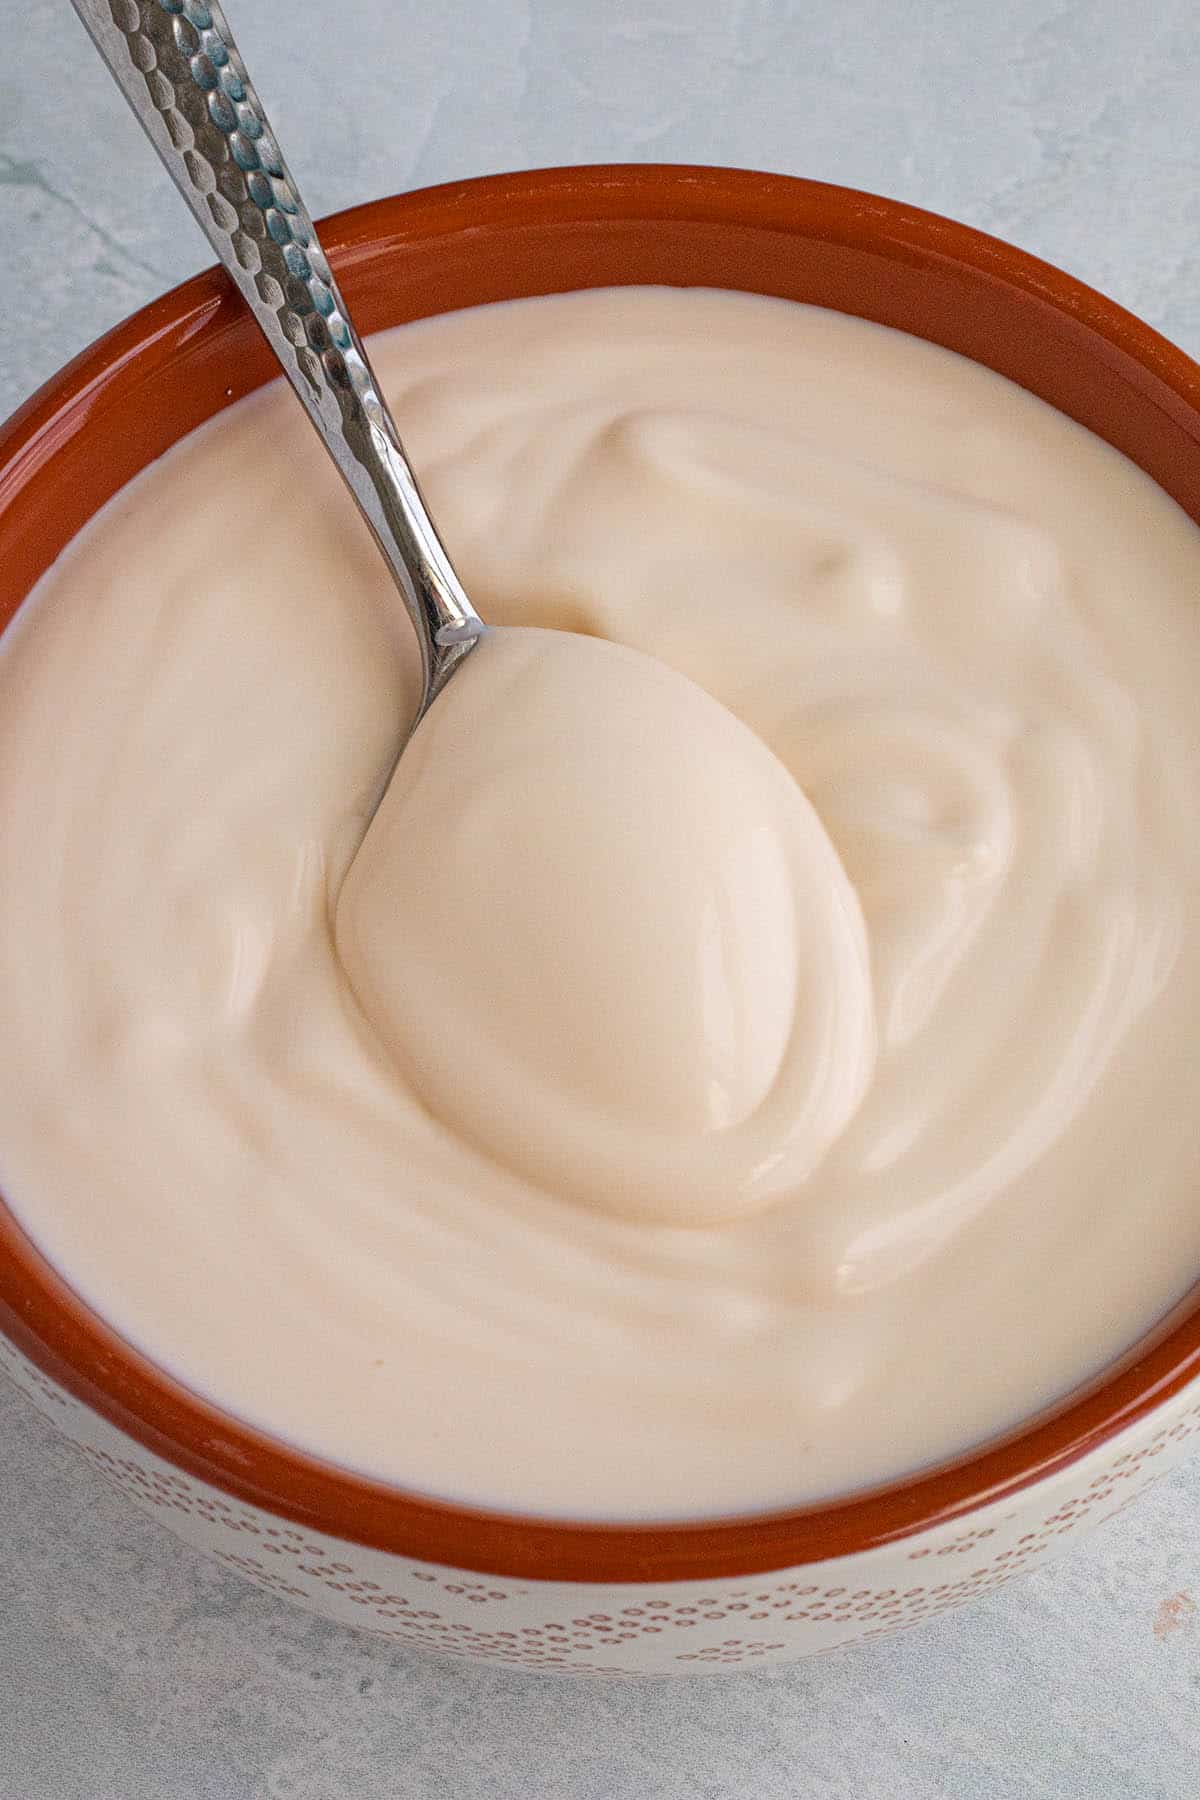 Mexican Crema: What it is and How to Use It - Chili Pepper Madness